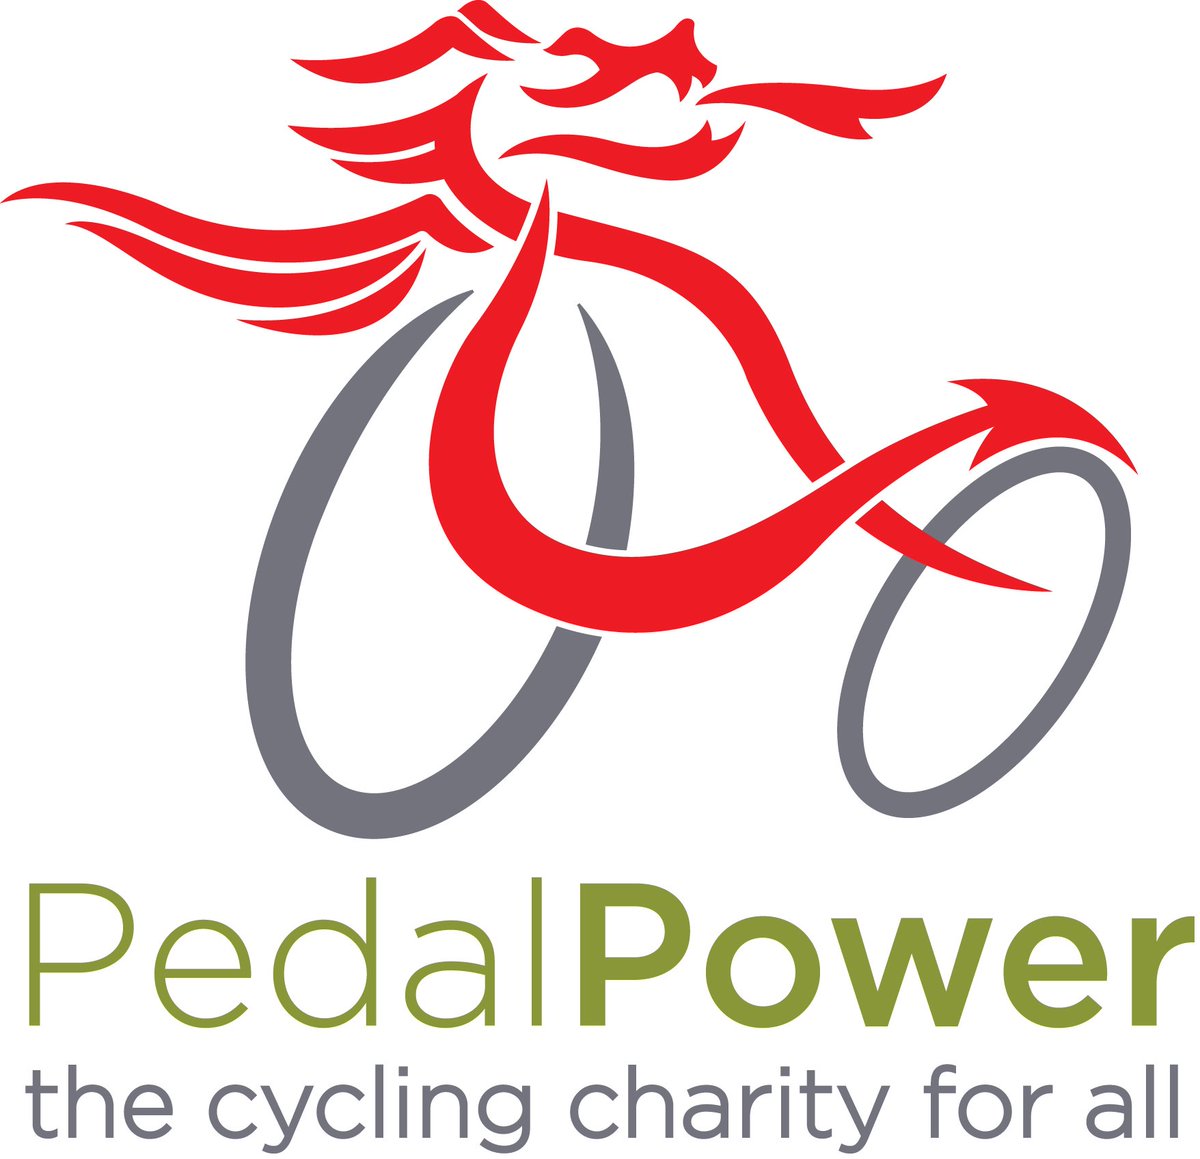 We're recruiting! Part-time opportunity to join our dedicated team and do a job that makes a positive difference every day. cardiffpedalpower.org/jobs